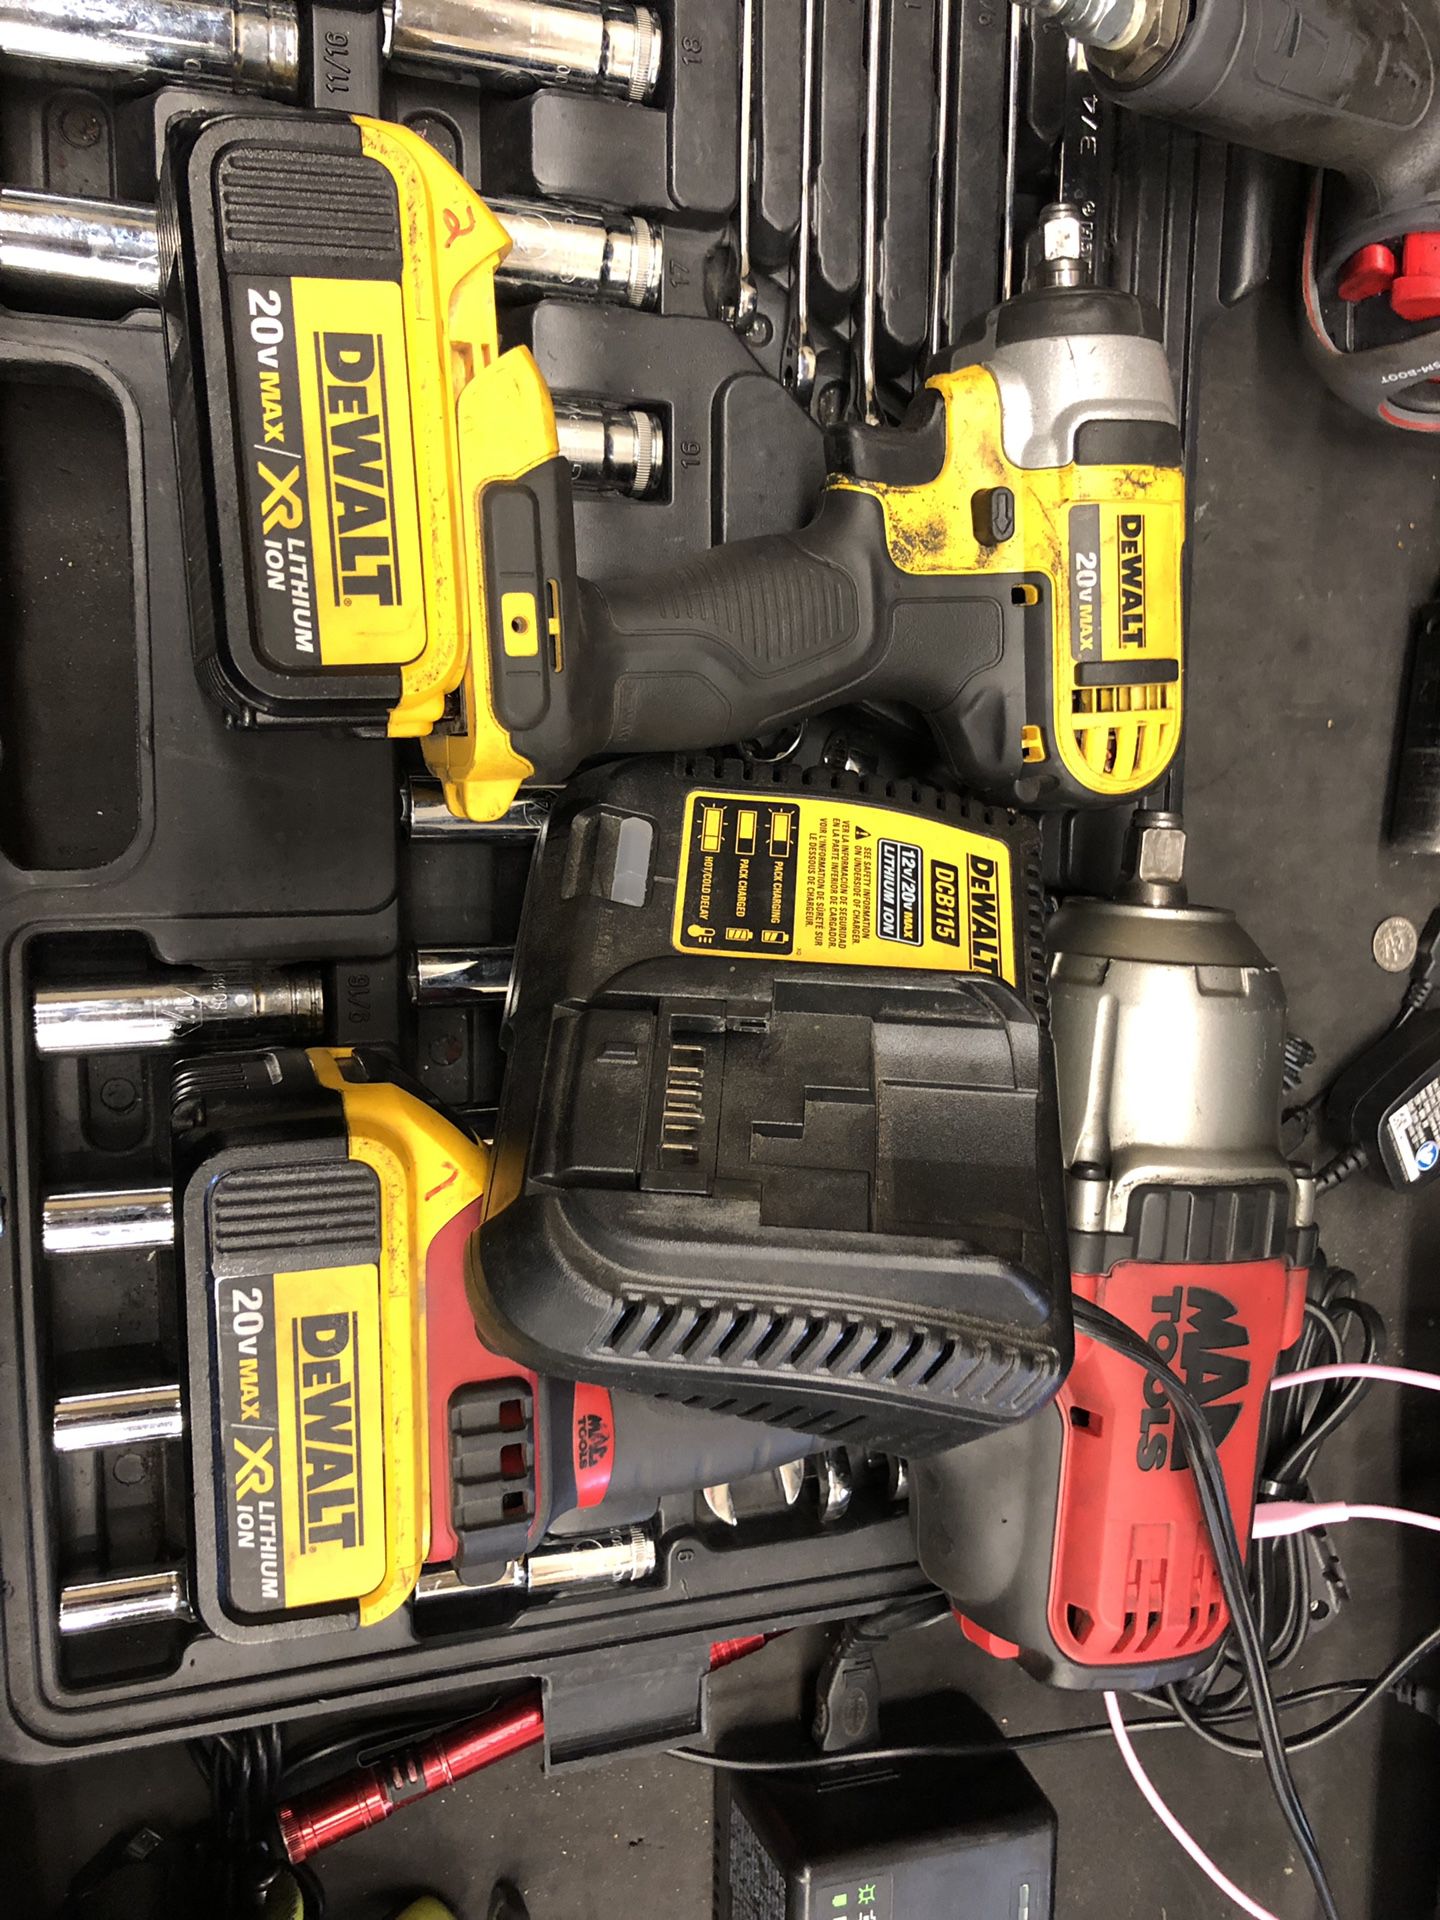 Dewalt 3/8 and Mac Tools 1/2 inch power drives comes with 2 batteries and charger